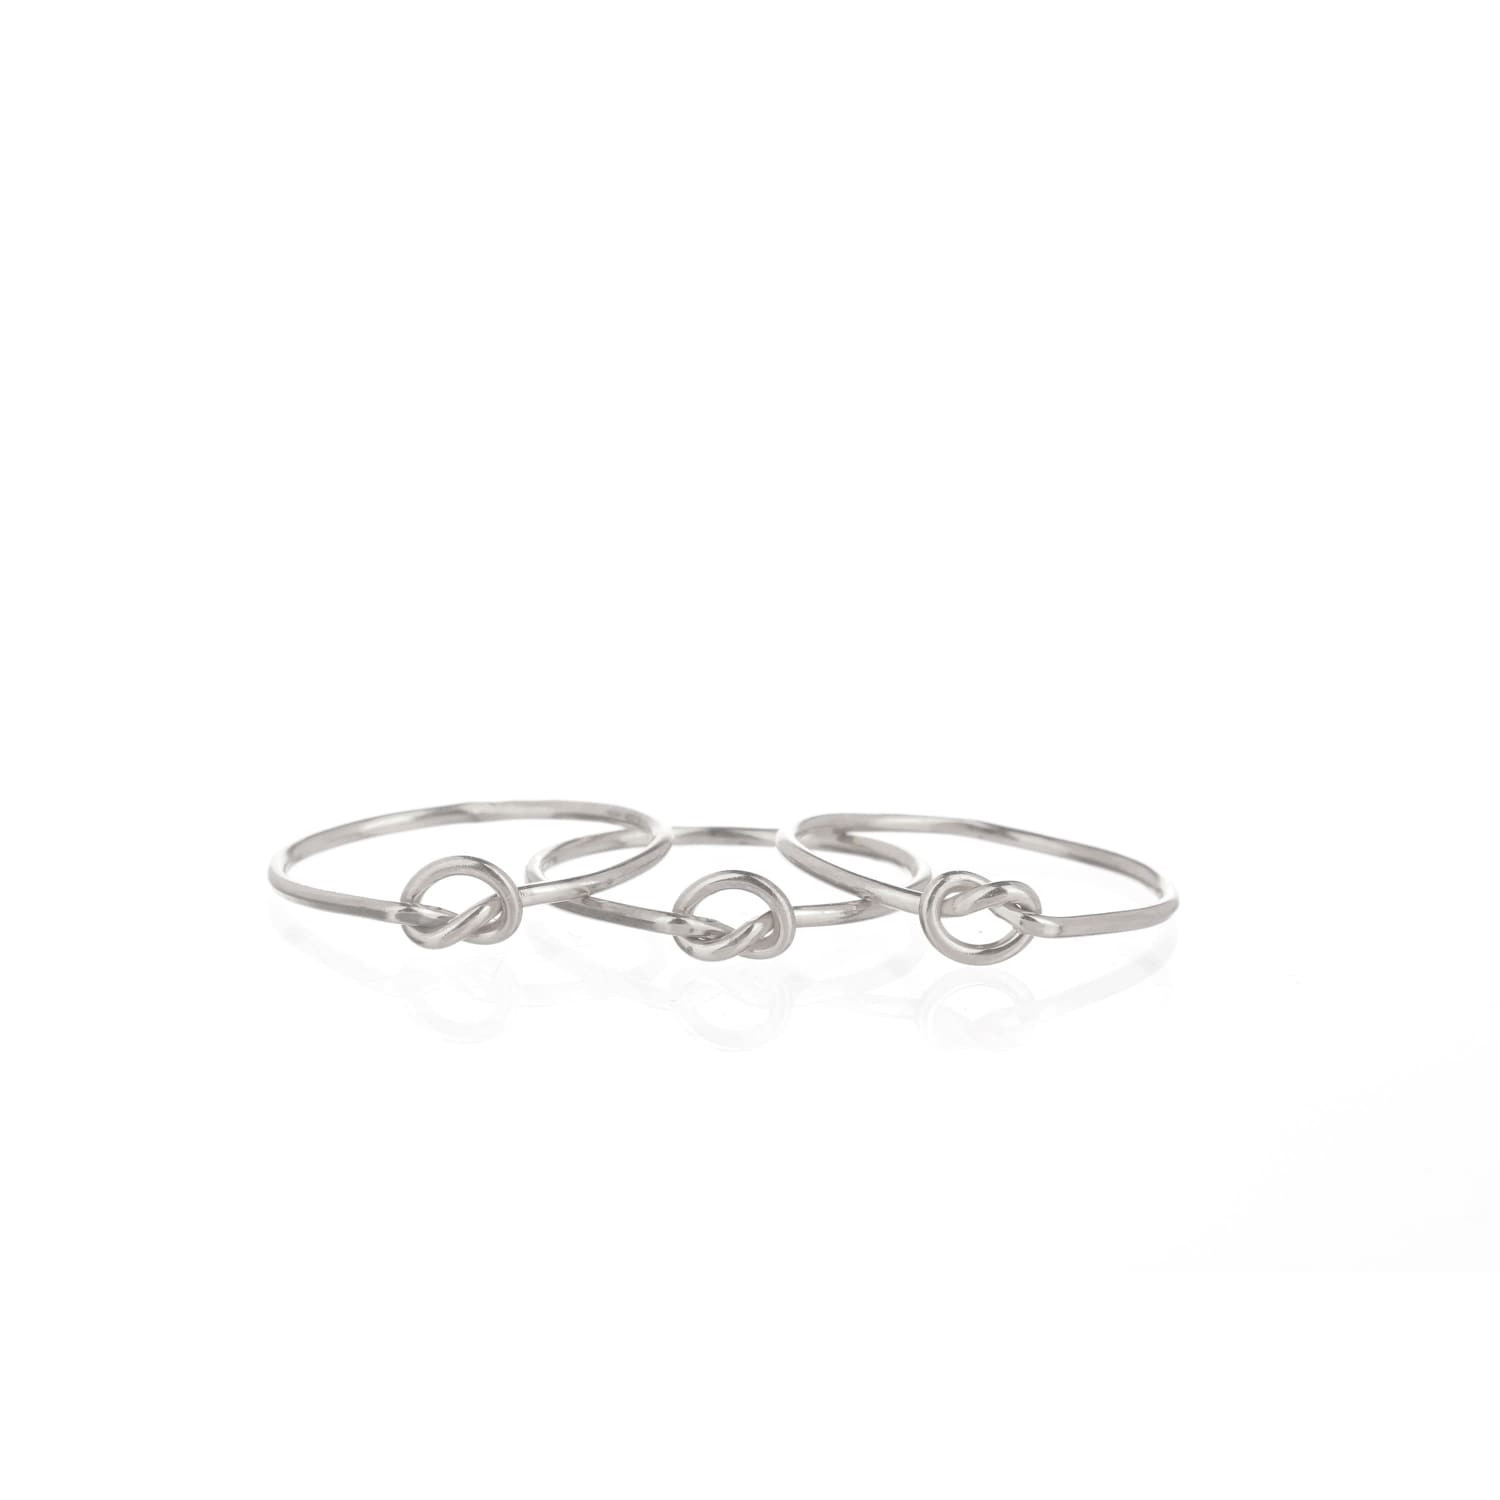 Single Love Knot Ring 14k Rose Gold Filled Valentines Day